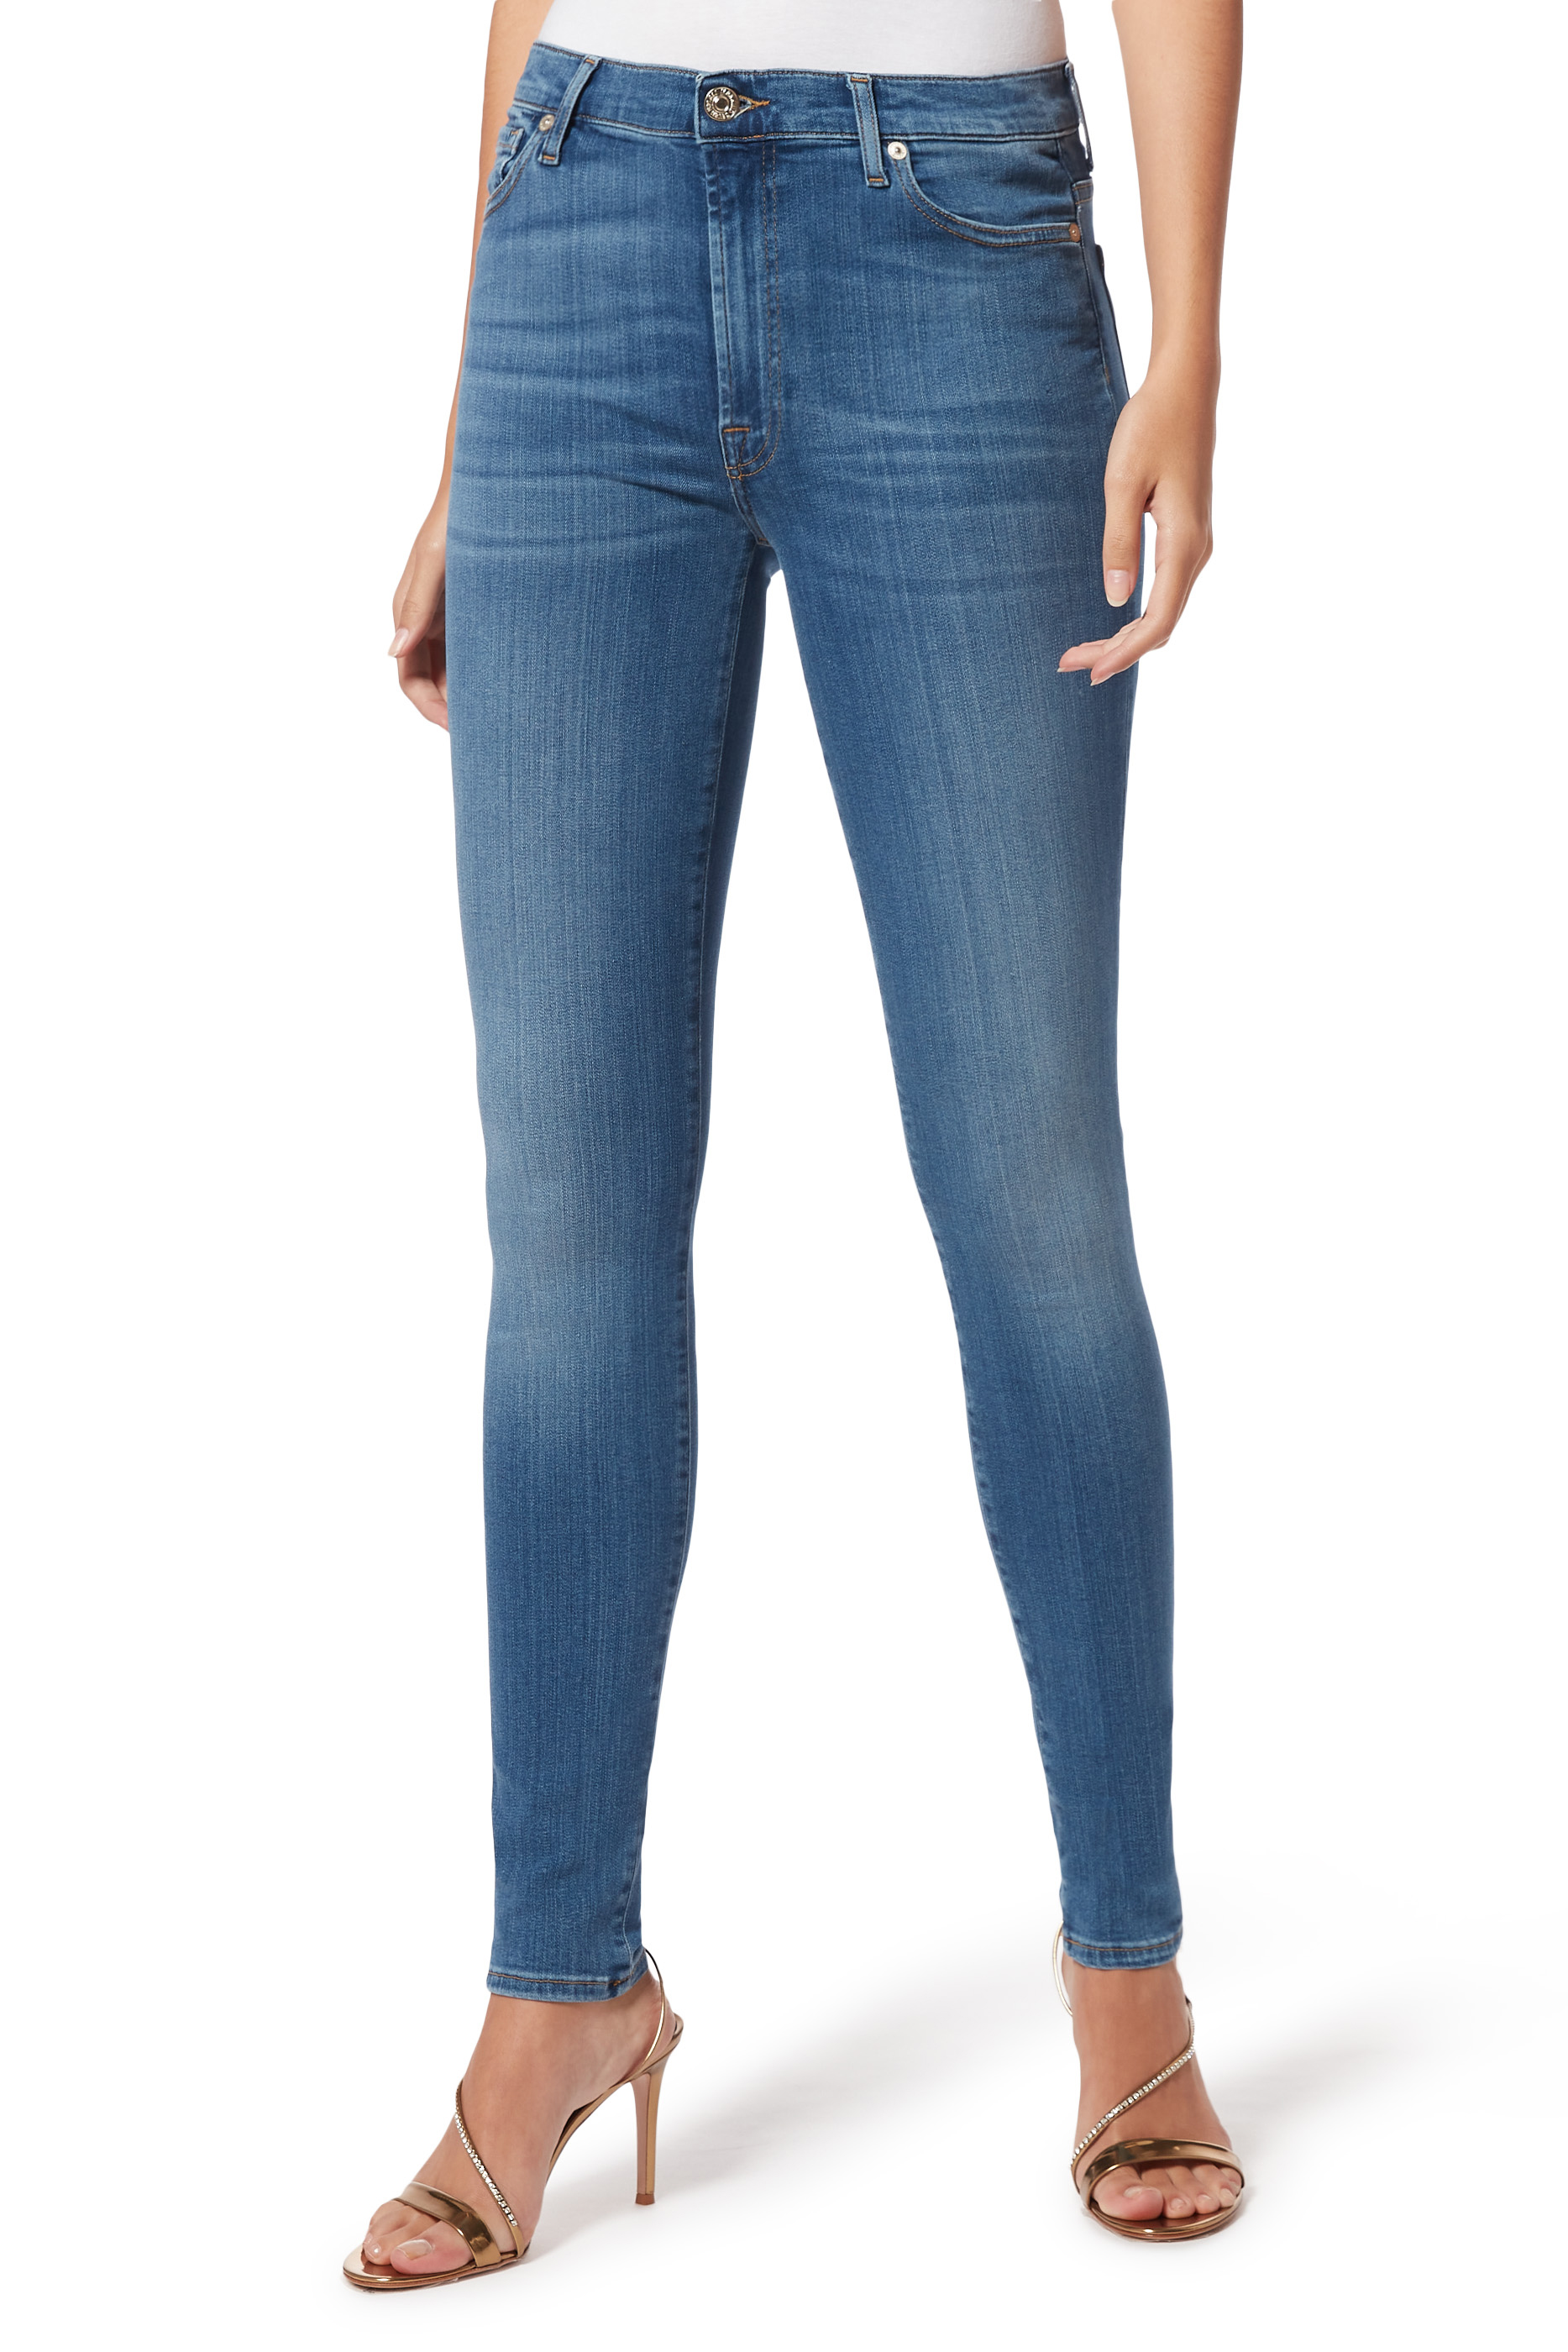 Buy 7 For All Mankind Slim Illusion Luxe Skinny Jeans for Womens ...